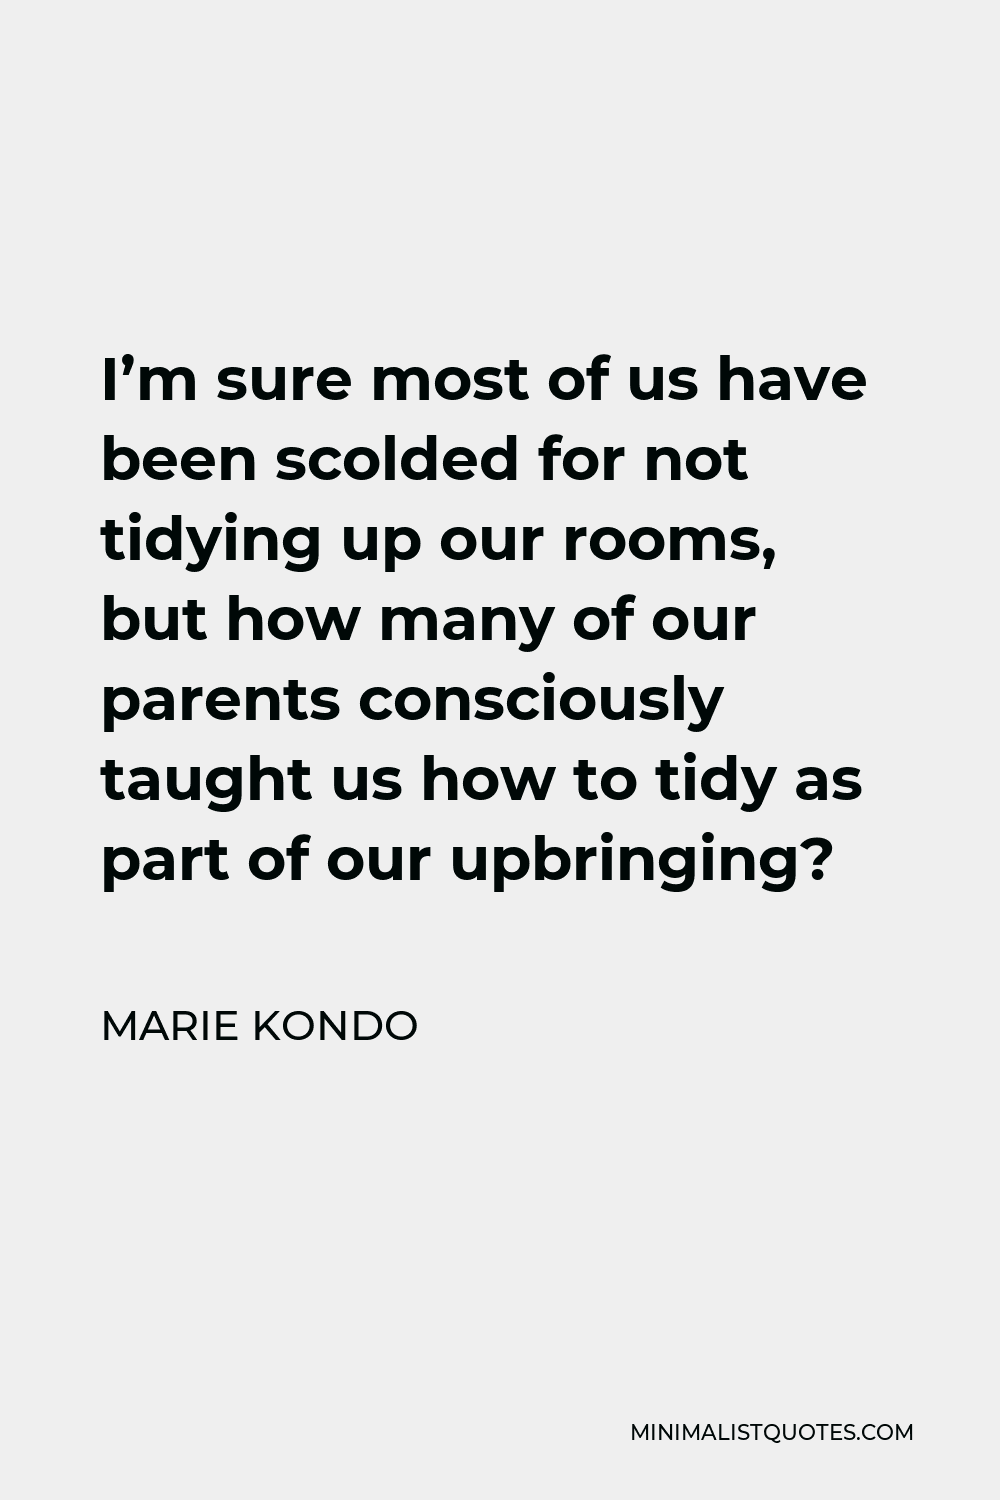 Marie Kondo Quote - I’m sure most of us have been scolded for not tidying up our rooms, but how many of our parents consciously taught us how to tidy as part of our upbringing?